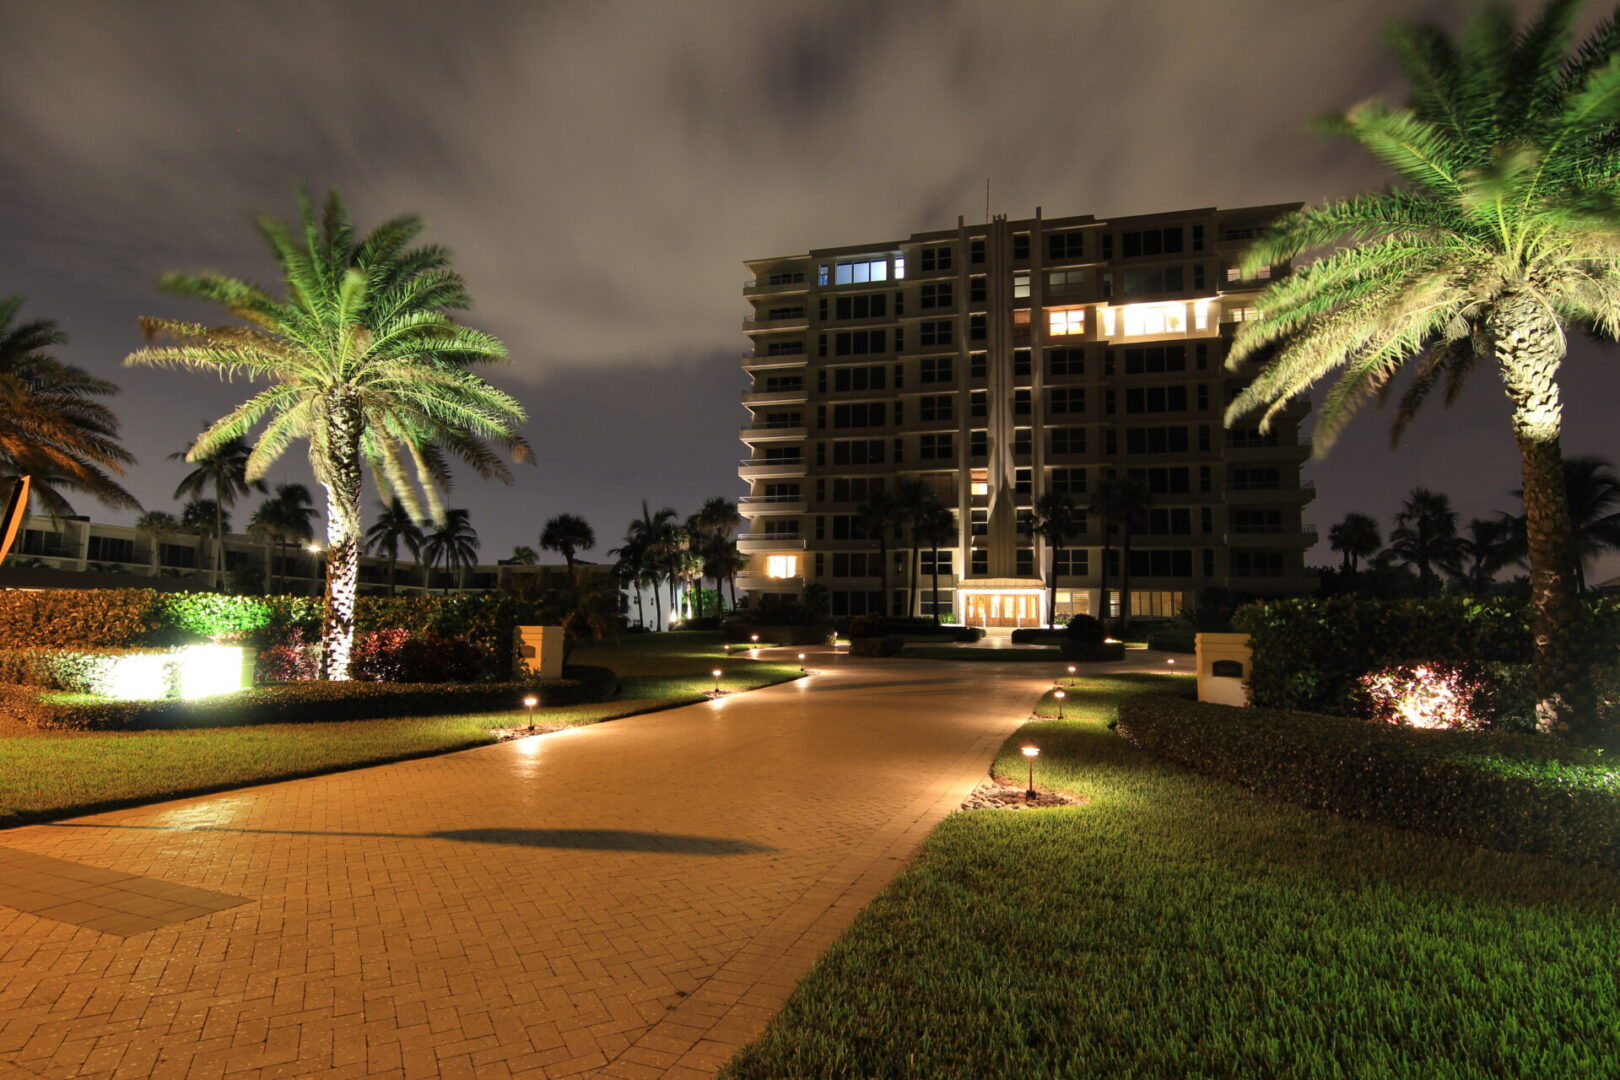 A night time view of the walkway and palm trees.